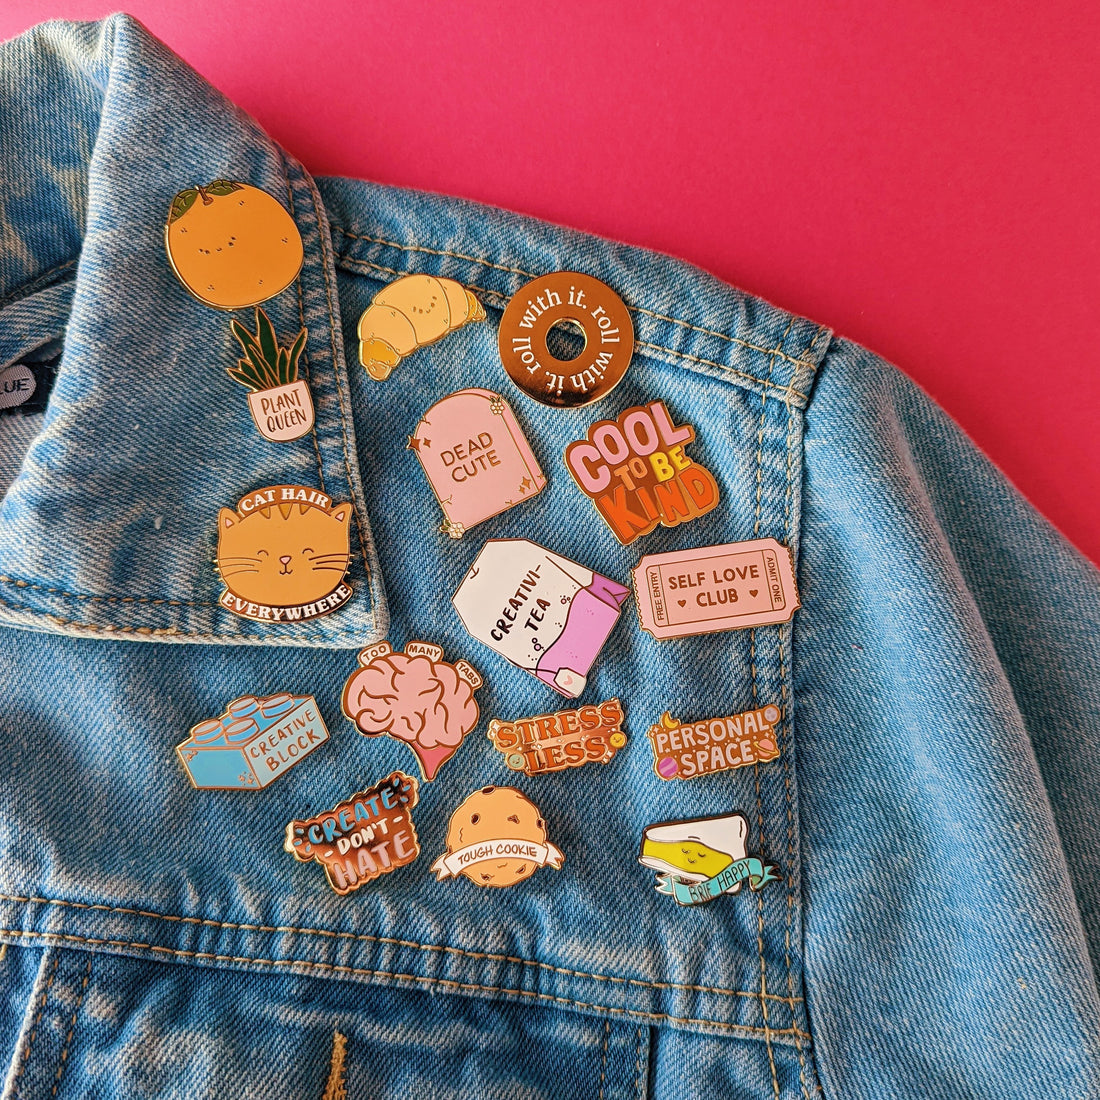 How to Wear Enamel Pins Without Ruining Clothes